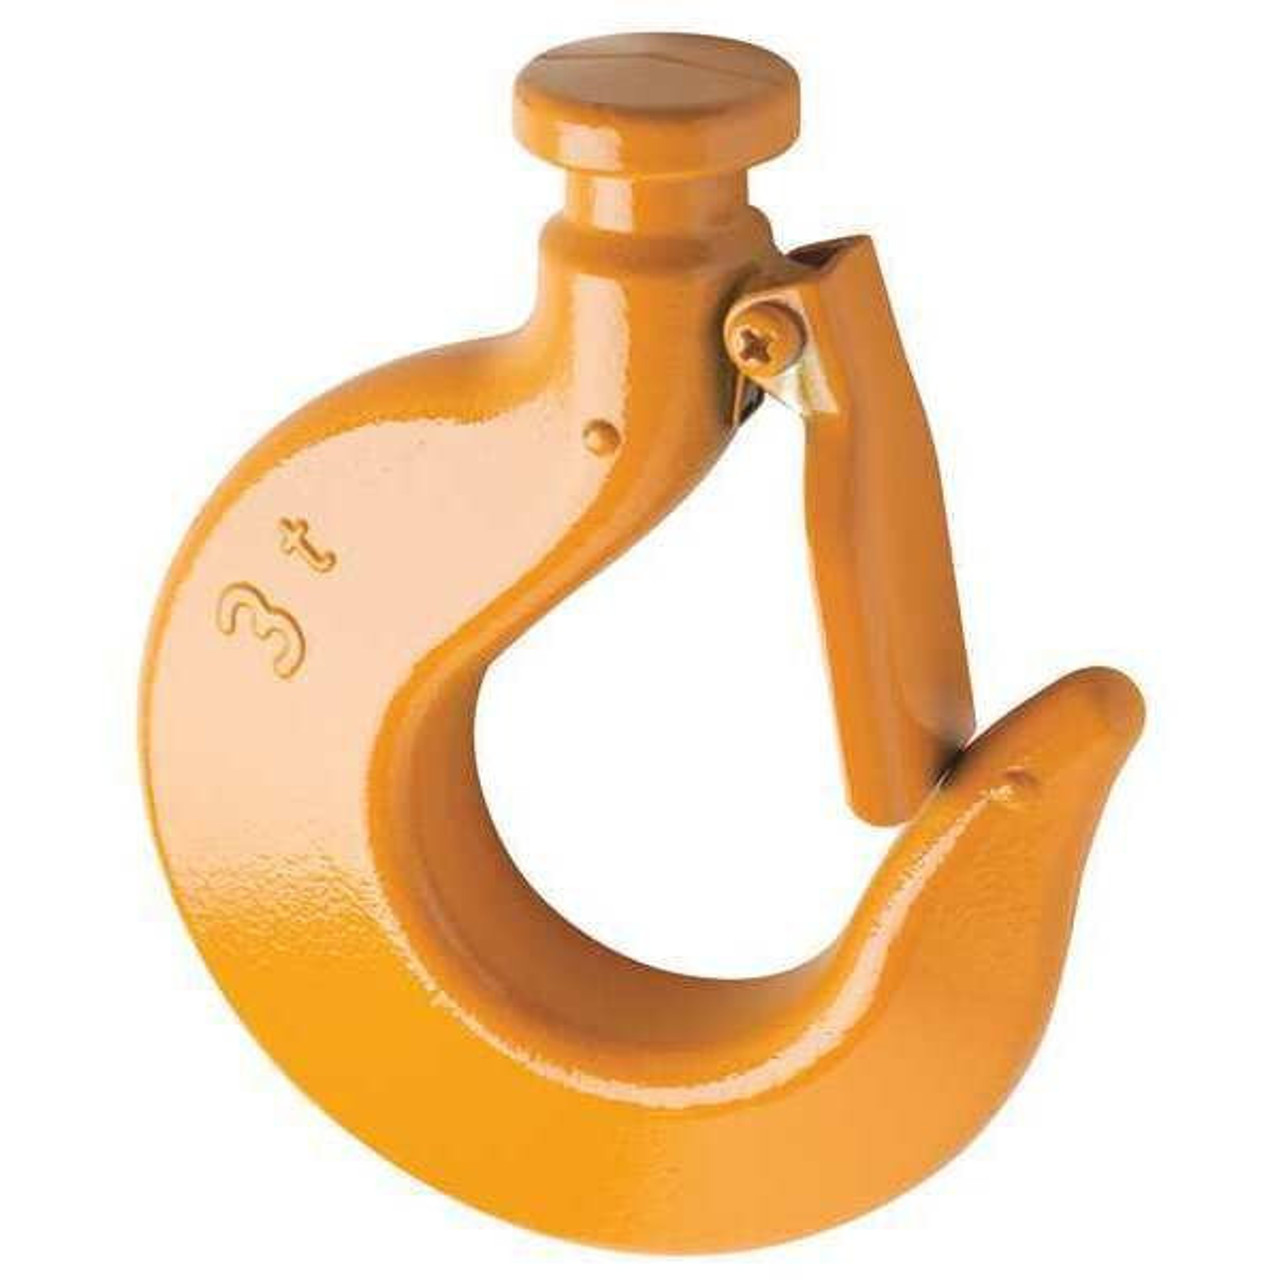 Bottom Hook Assembly, Product Type Bottom Hook Assembly, Compatible Hoist Type Manual Chain Hoists, Compatible Load Capacity 10,000 lb, Compatible Series SHB, Material Carbon Steel, Overall Length Not Applicable, Overall Width Not Applicable, Overall Height Not Applicable, Includes Safety Latch